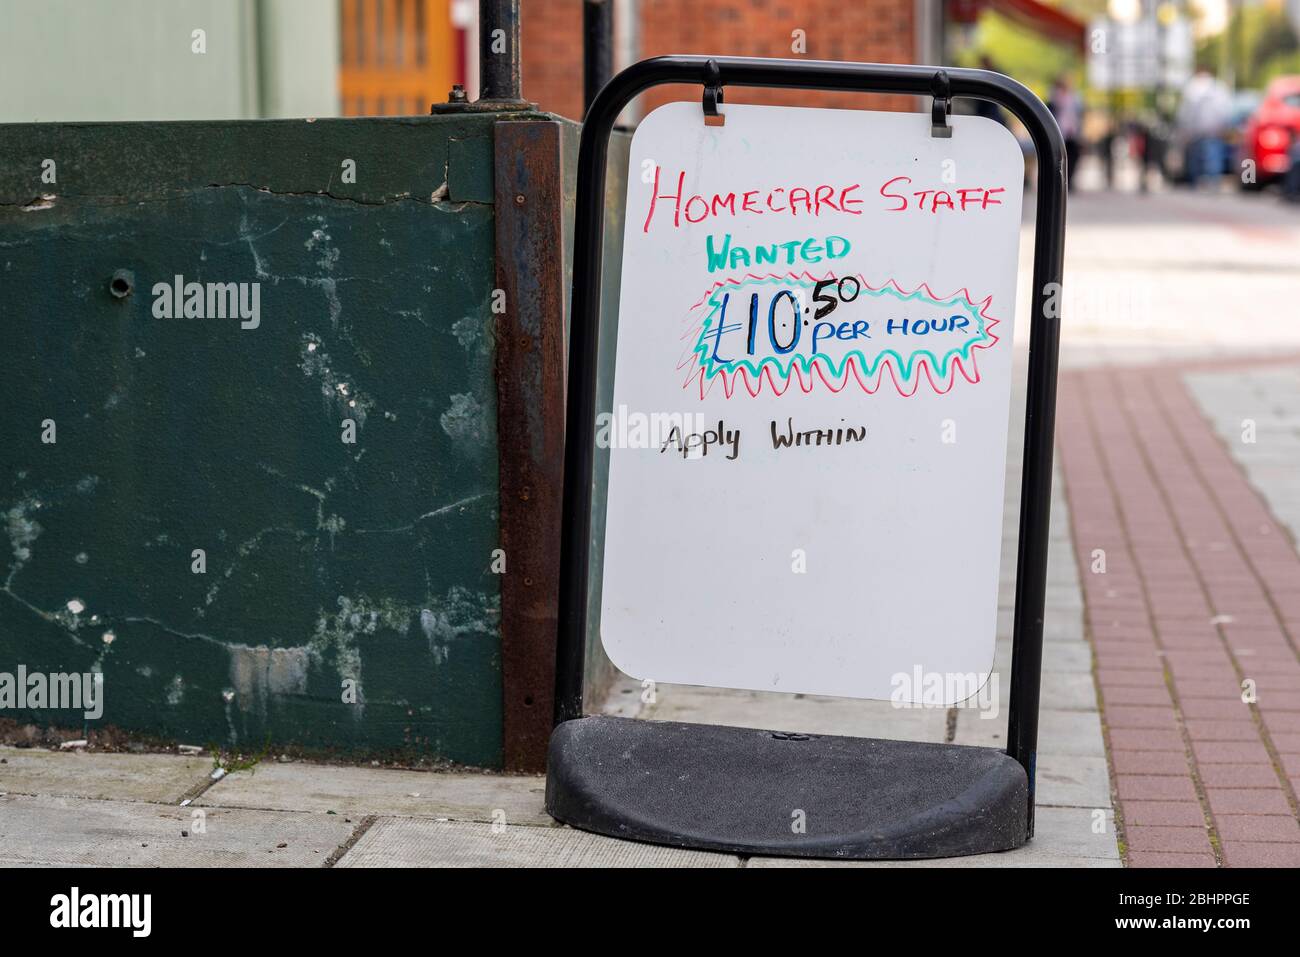 Advert for home care staff outside employment agency during the COVID-19 Coronavirus pandemic outbreak period, Southend on Sea, Essex, UK. Pay rise Stock Photo